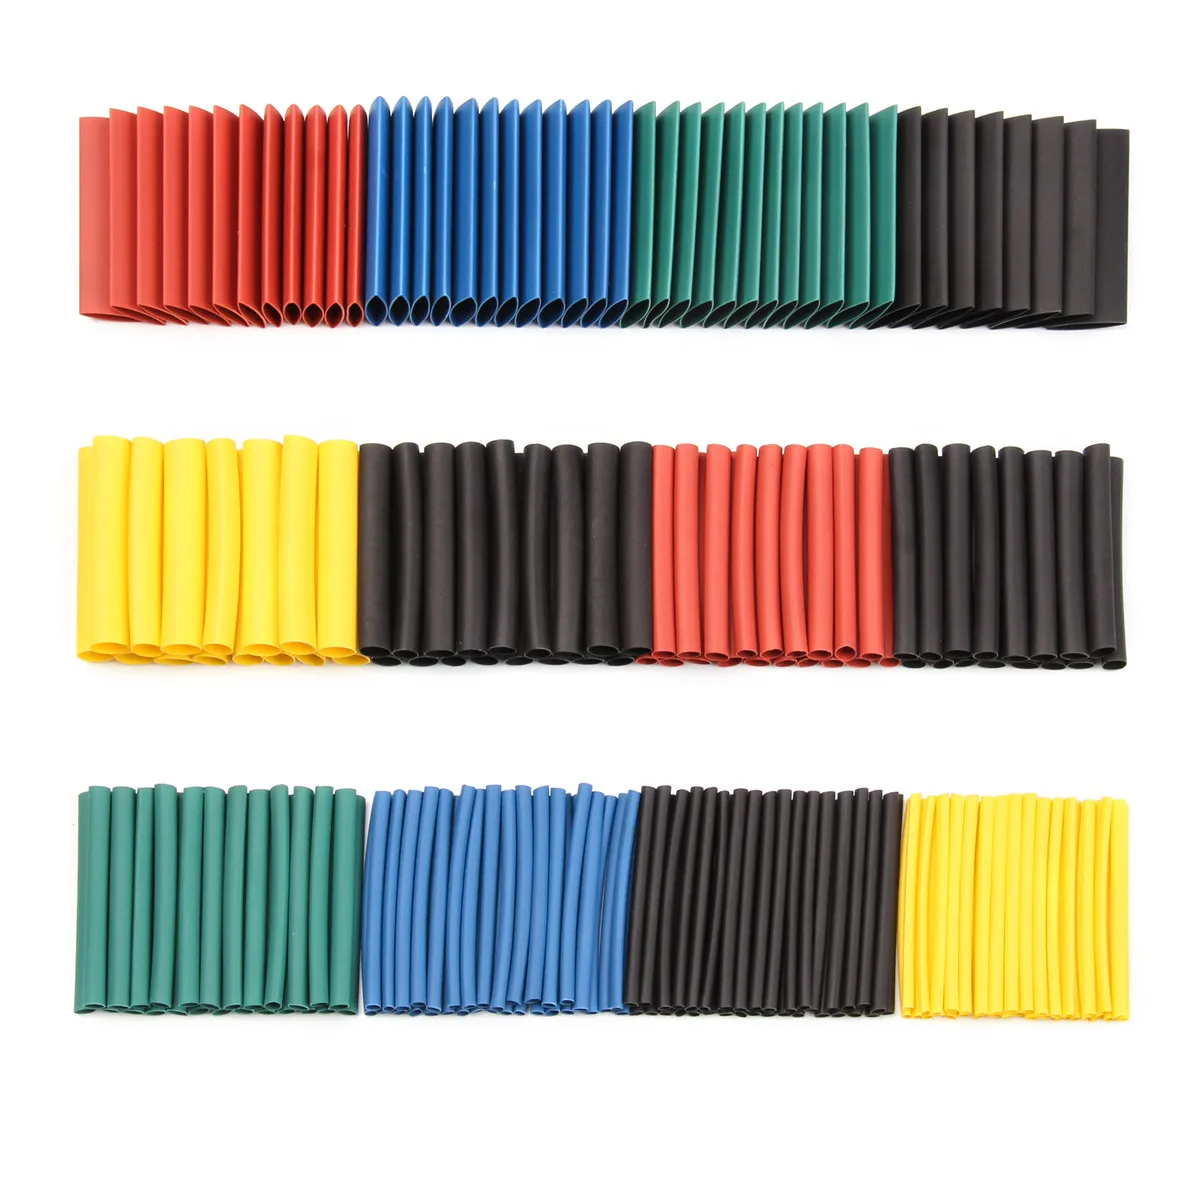 DEDC 530Pcs 2:1 Heat Shrink Tubing 5 Color 8 Size Tube Sleeving Wrap Cable Wire for Electrical Wire Cable Wrap Assortment Electric 